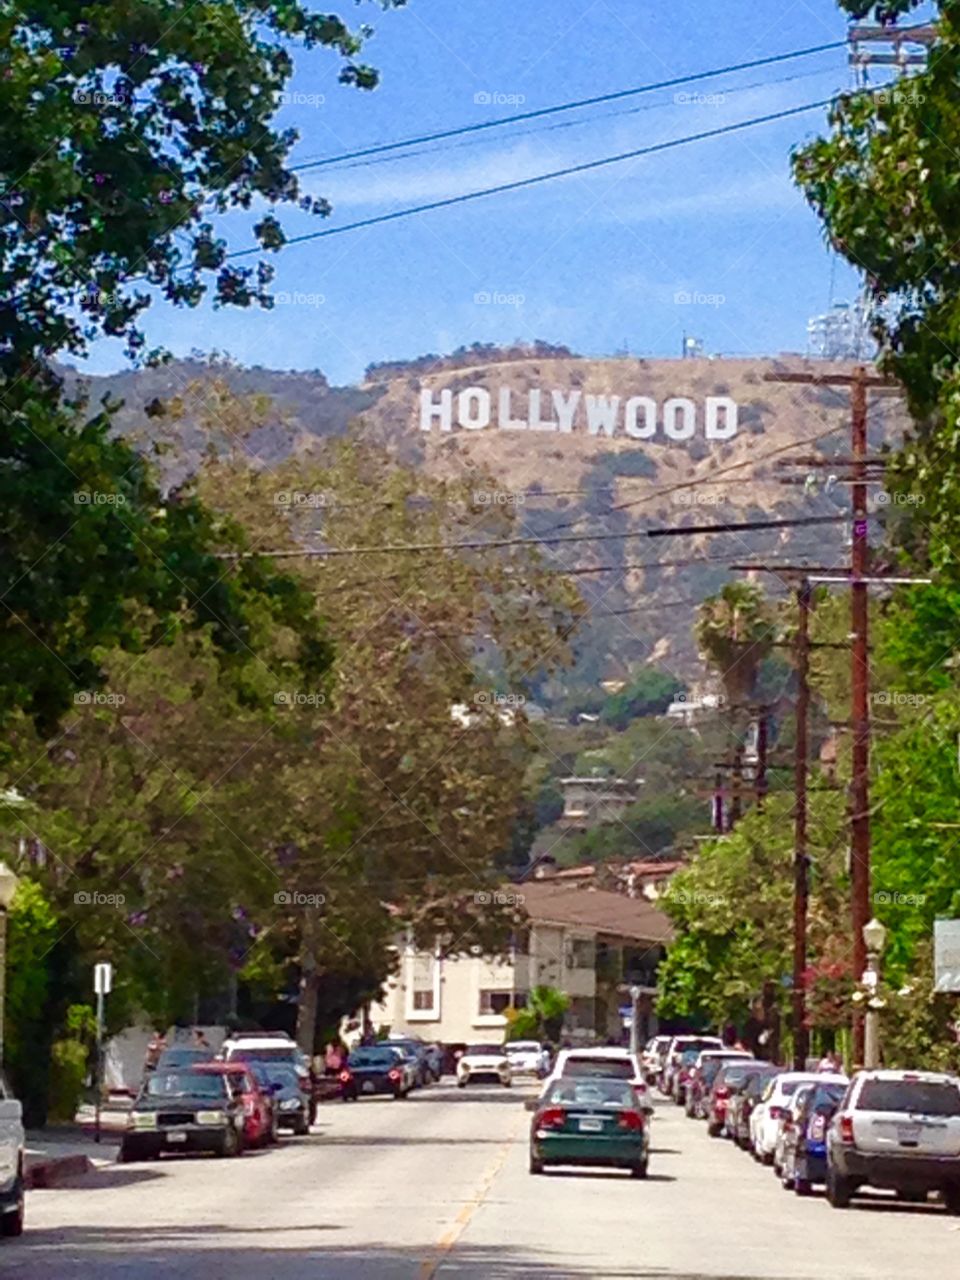 On way to Hollywood, Los Angeles, USA